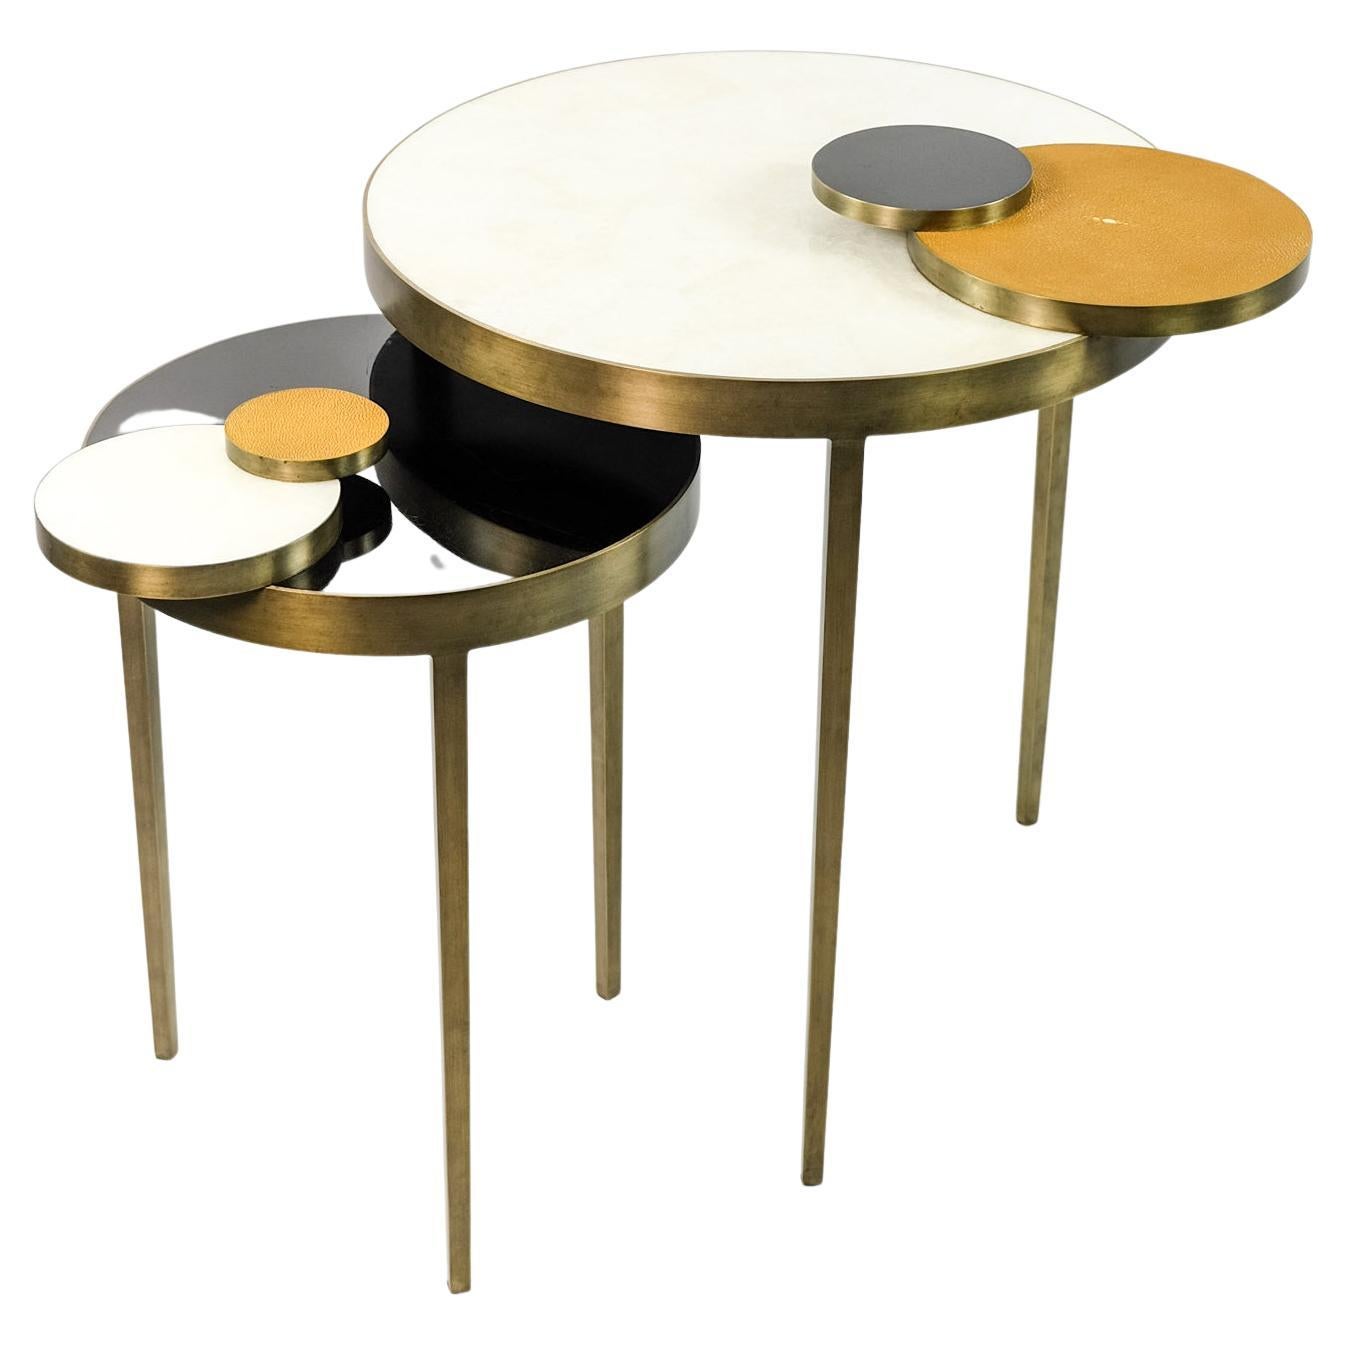 Rock Crystal and Brass Nesting Tables by Ginger Brown